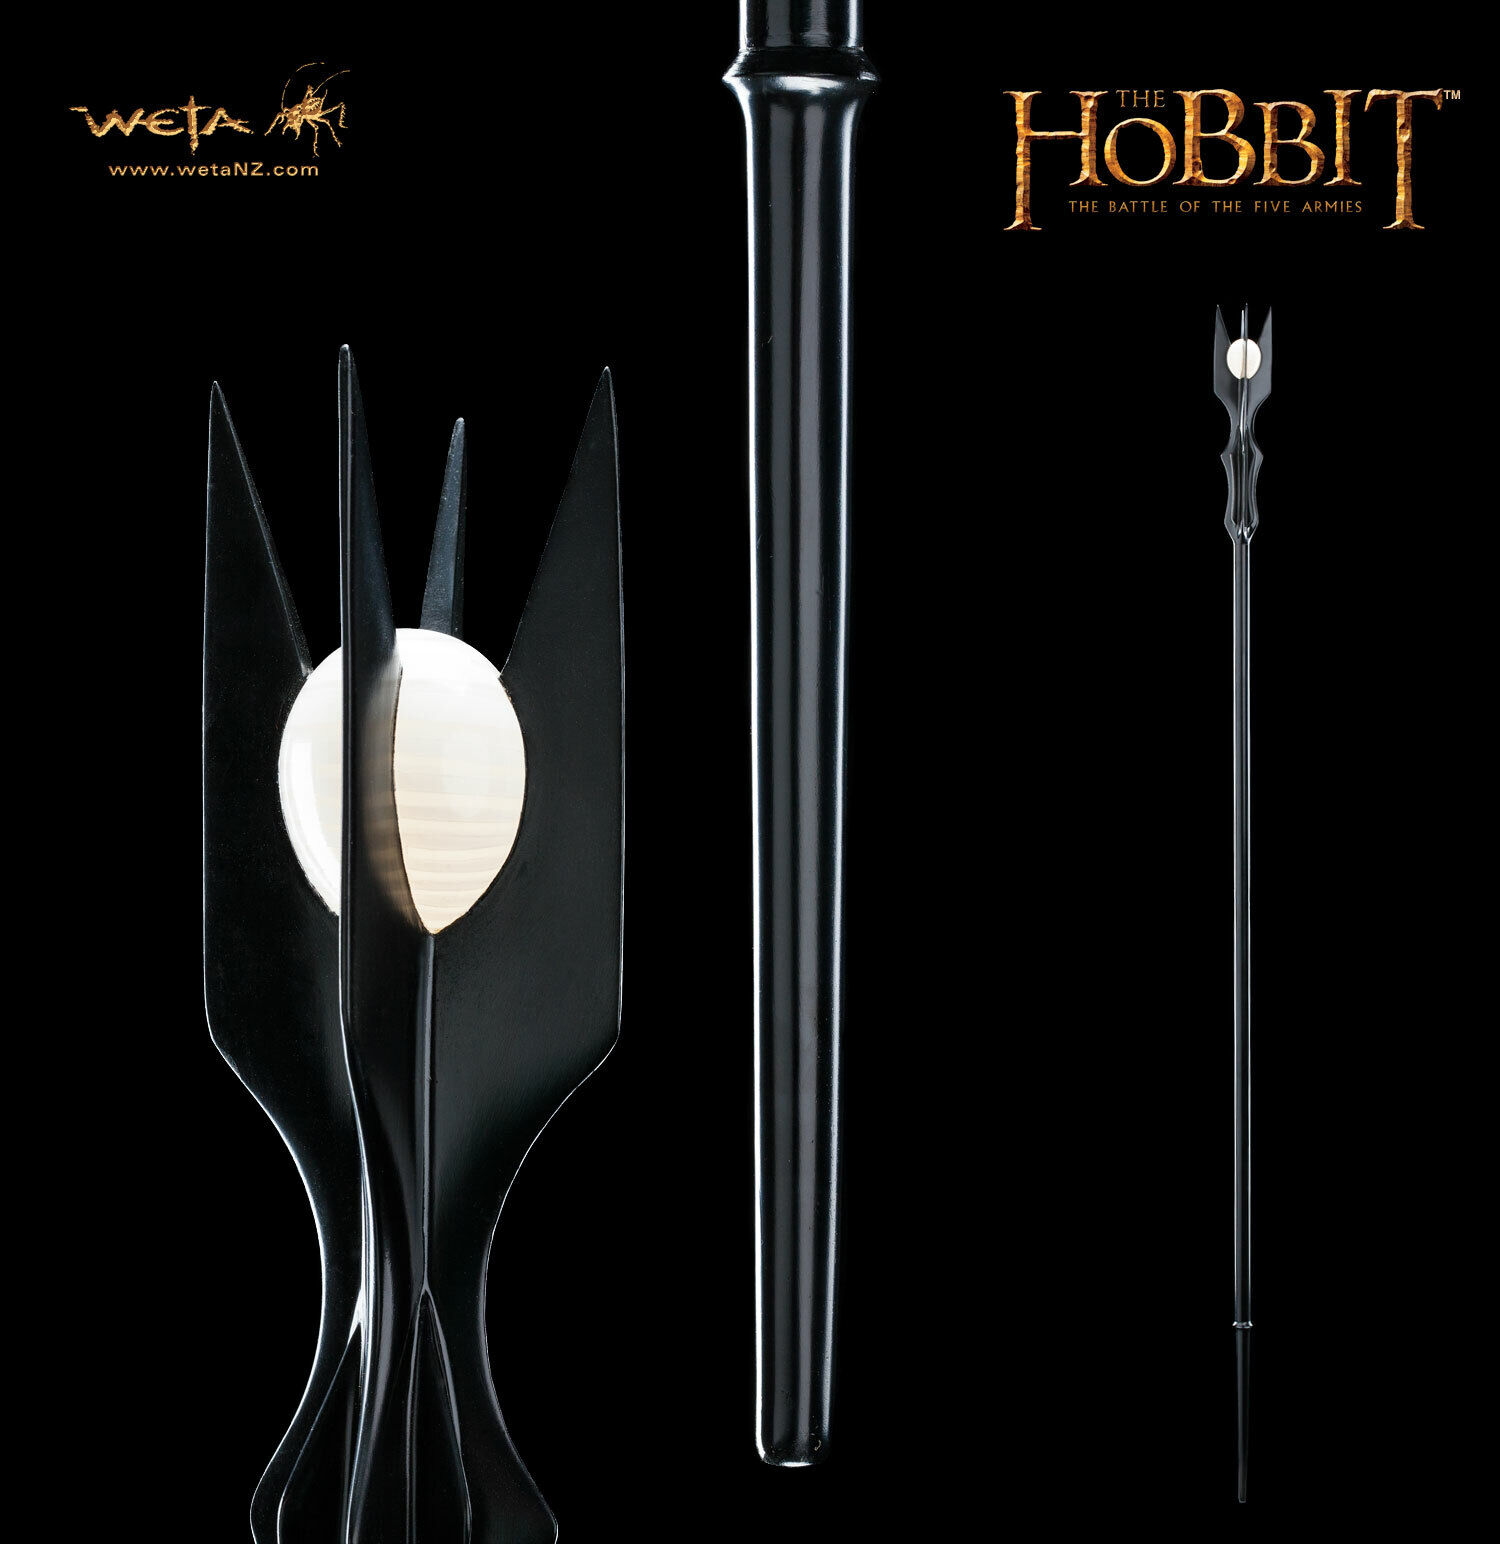 most valuable Lord of the Rings collectibles: Weta Staff of Saruman replica